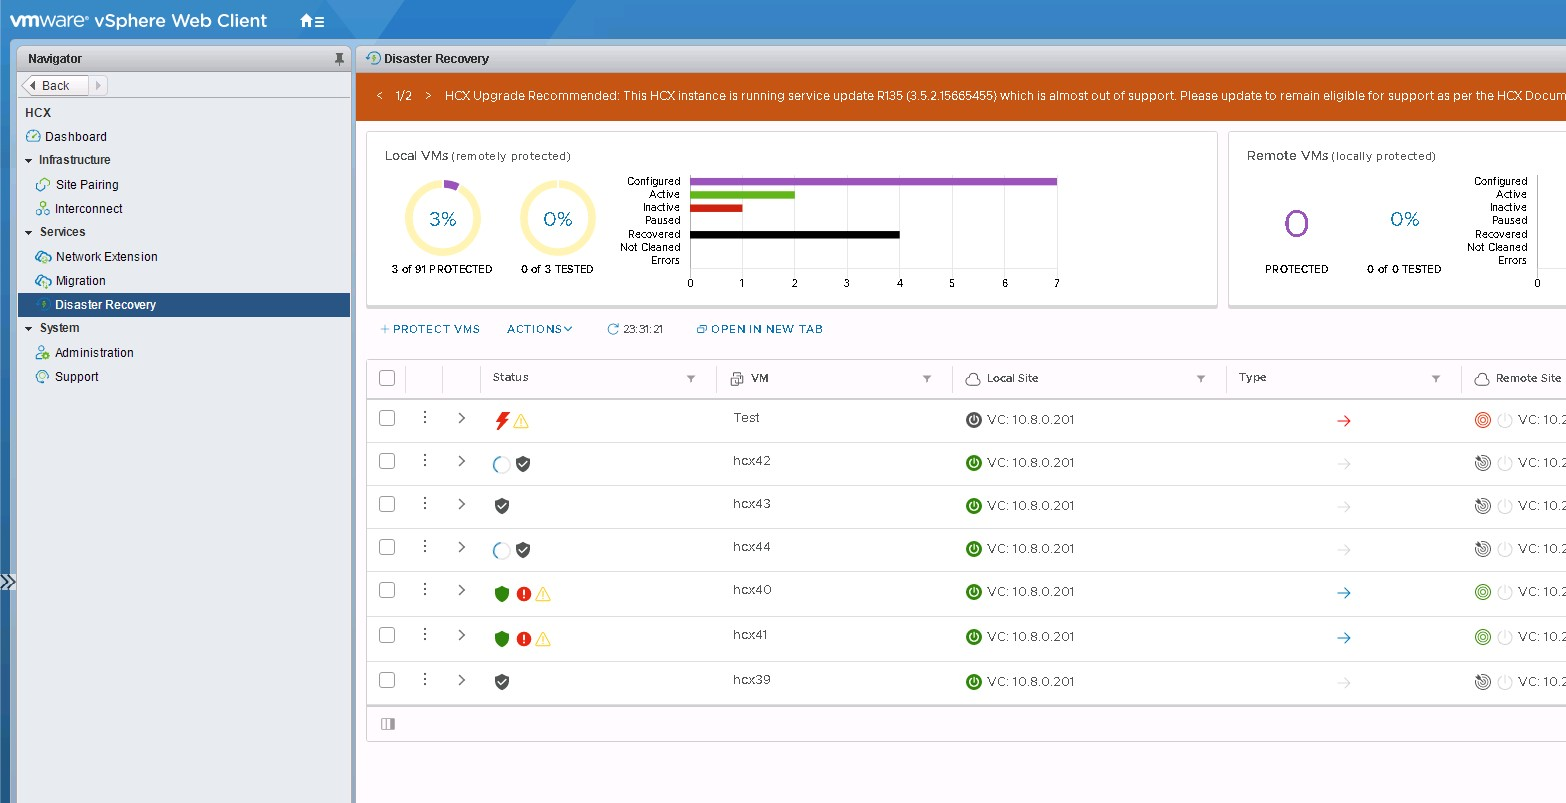 Screenshot showing the Disaster Recovery dashboard in the vSphere Web Client.